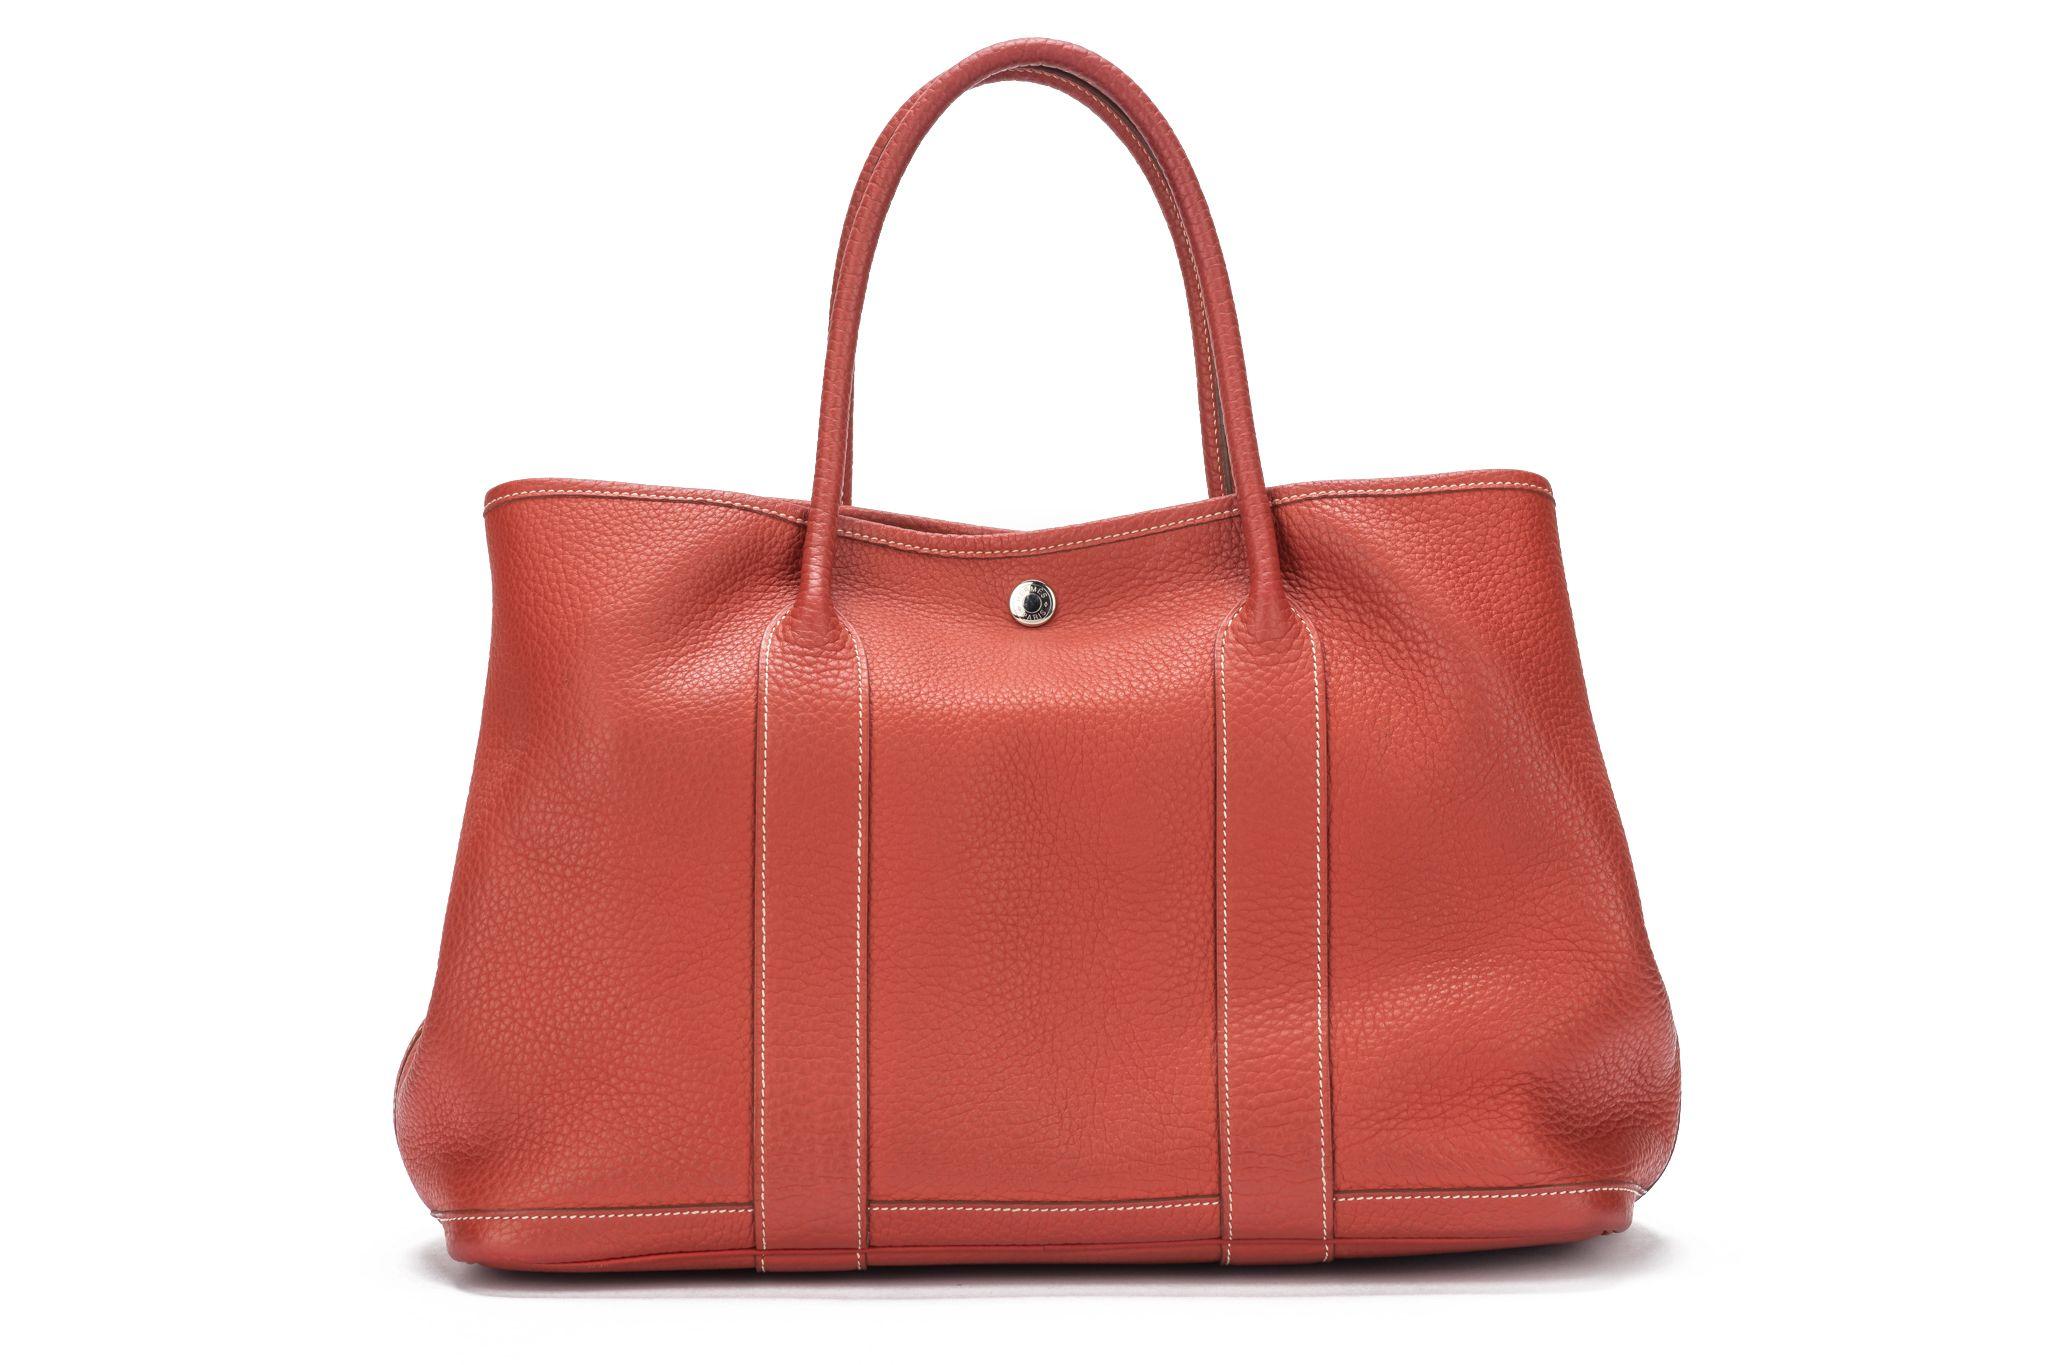 Hermès Large Garden Party Bag Sanguine In Excellent Condition For Sale In West Hollywood, CA